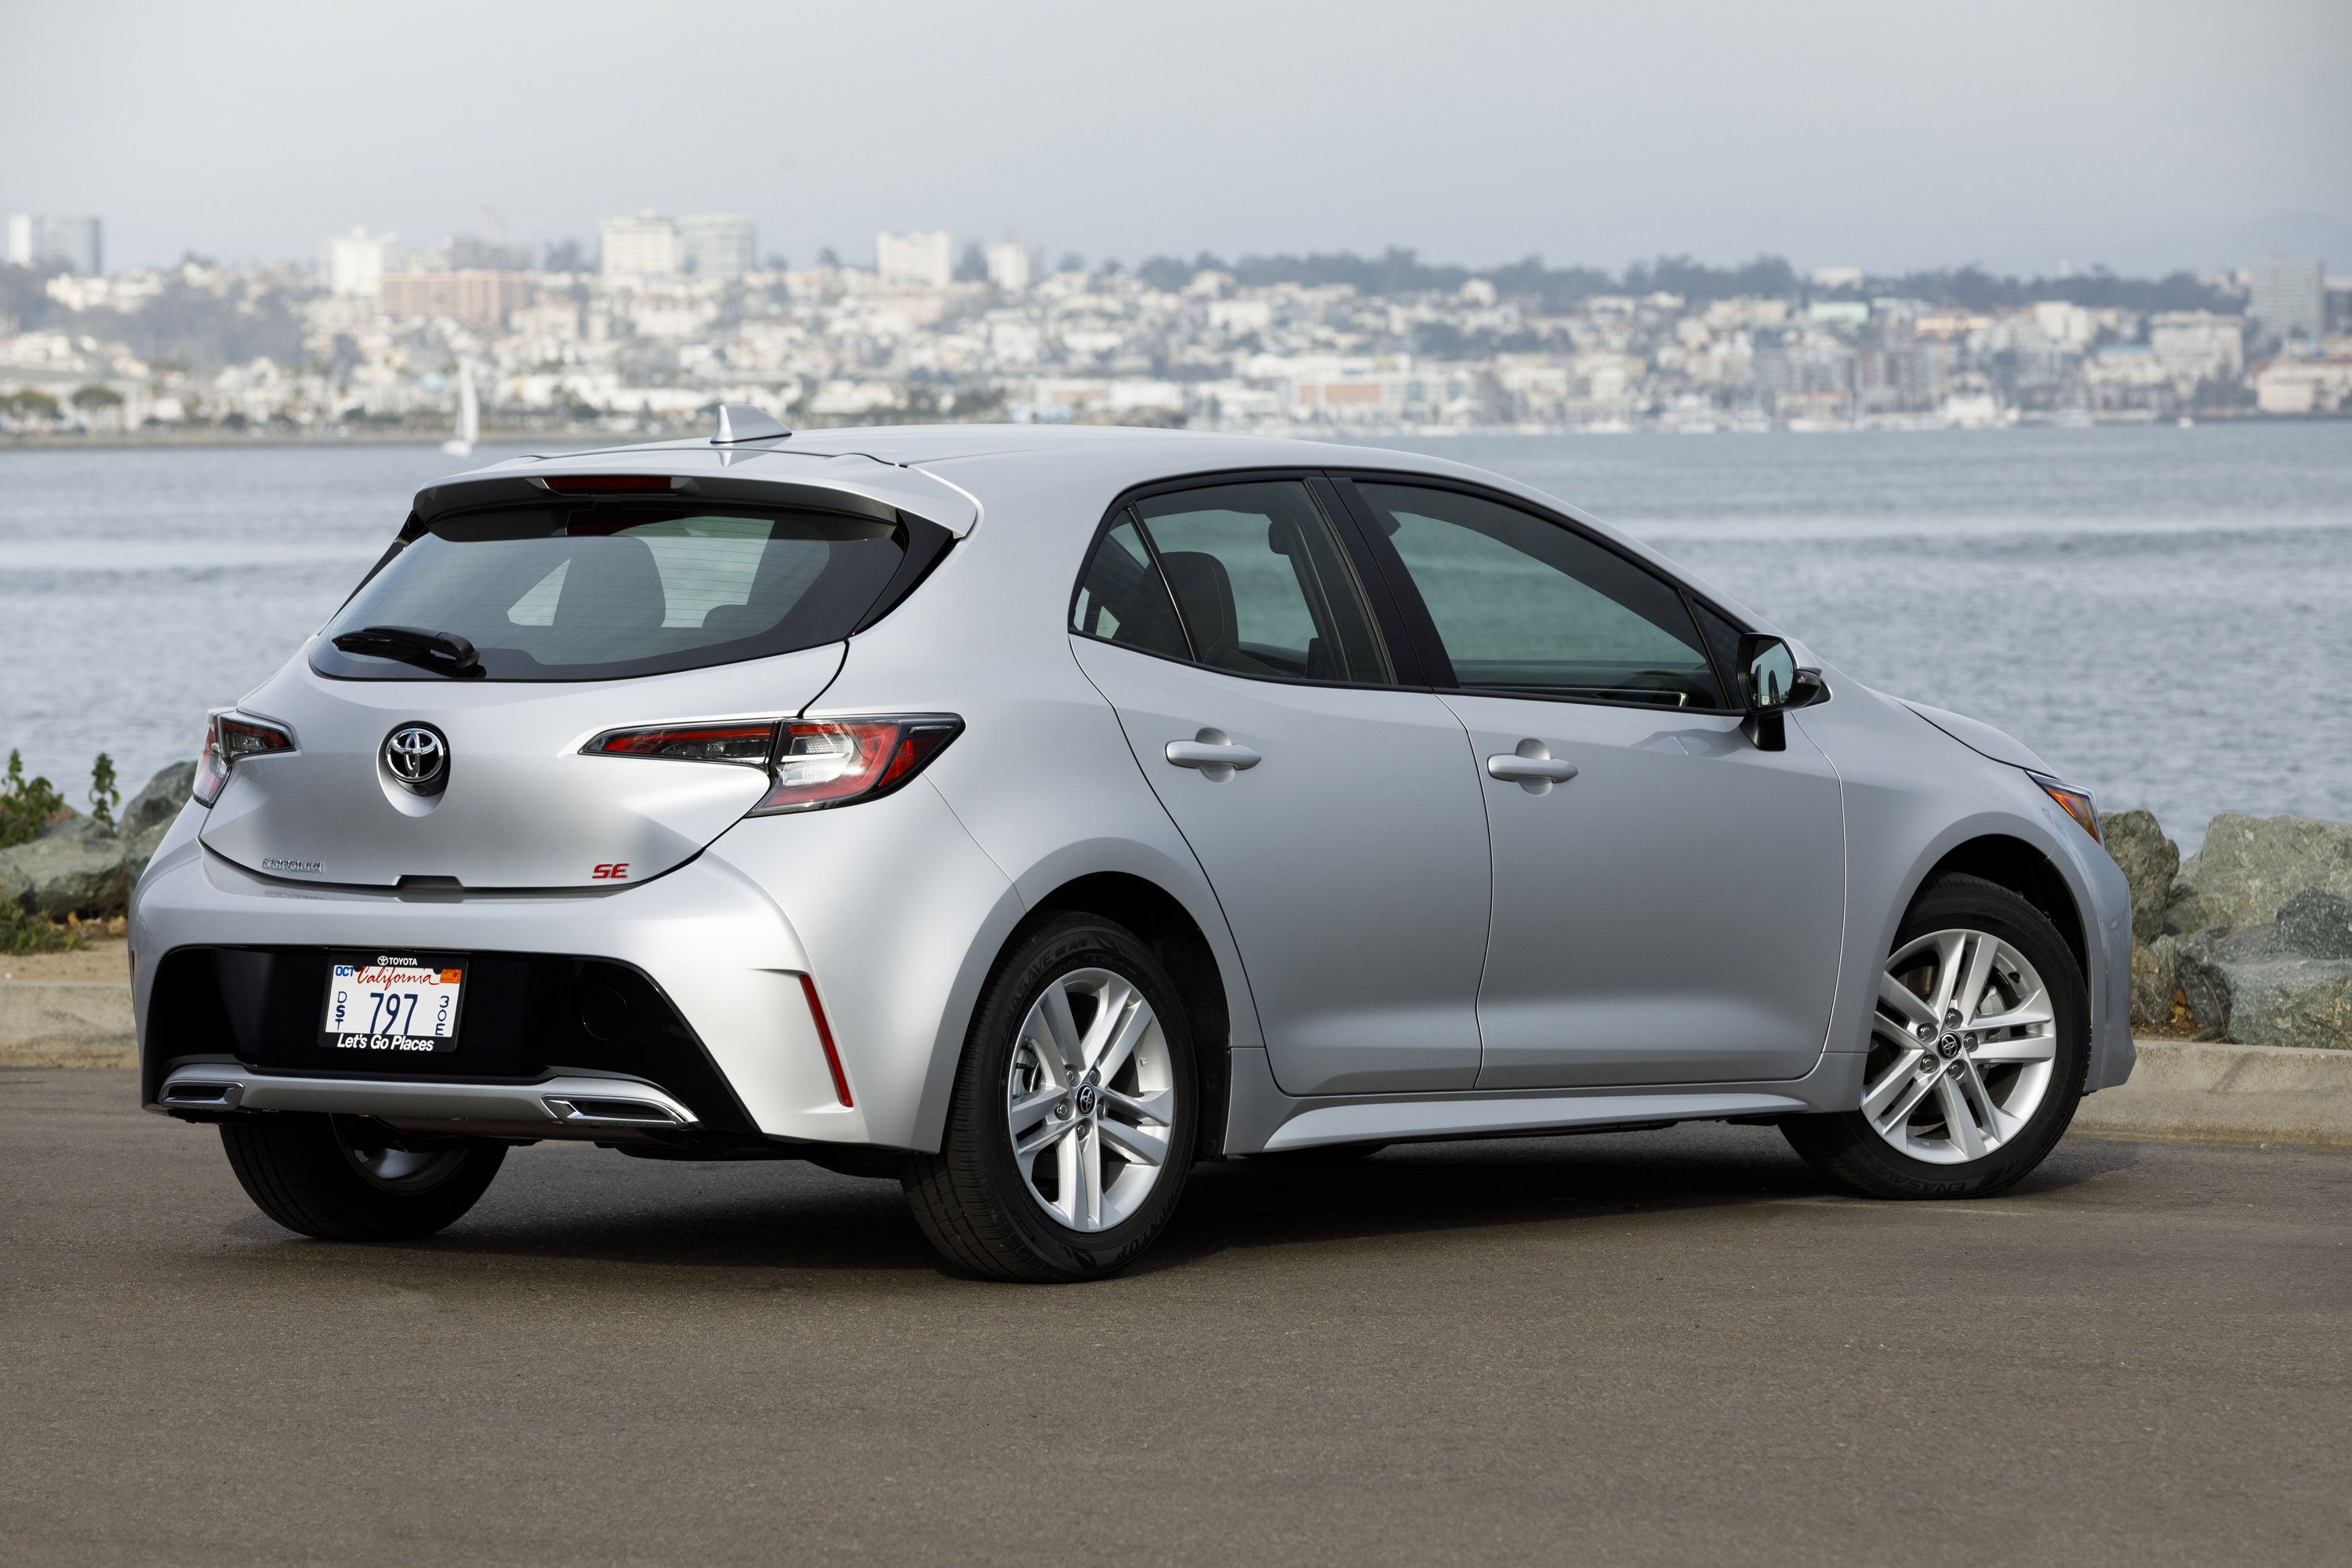 Let's talk about new Corolla's safety features, shall we?. Toyota corolla hatchback, Corolla hatchback, Toyota corolla